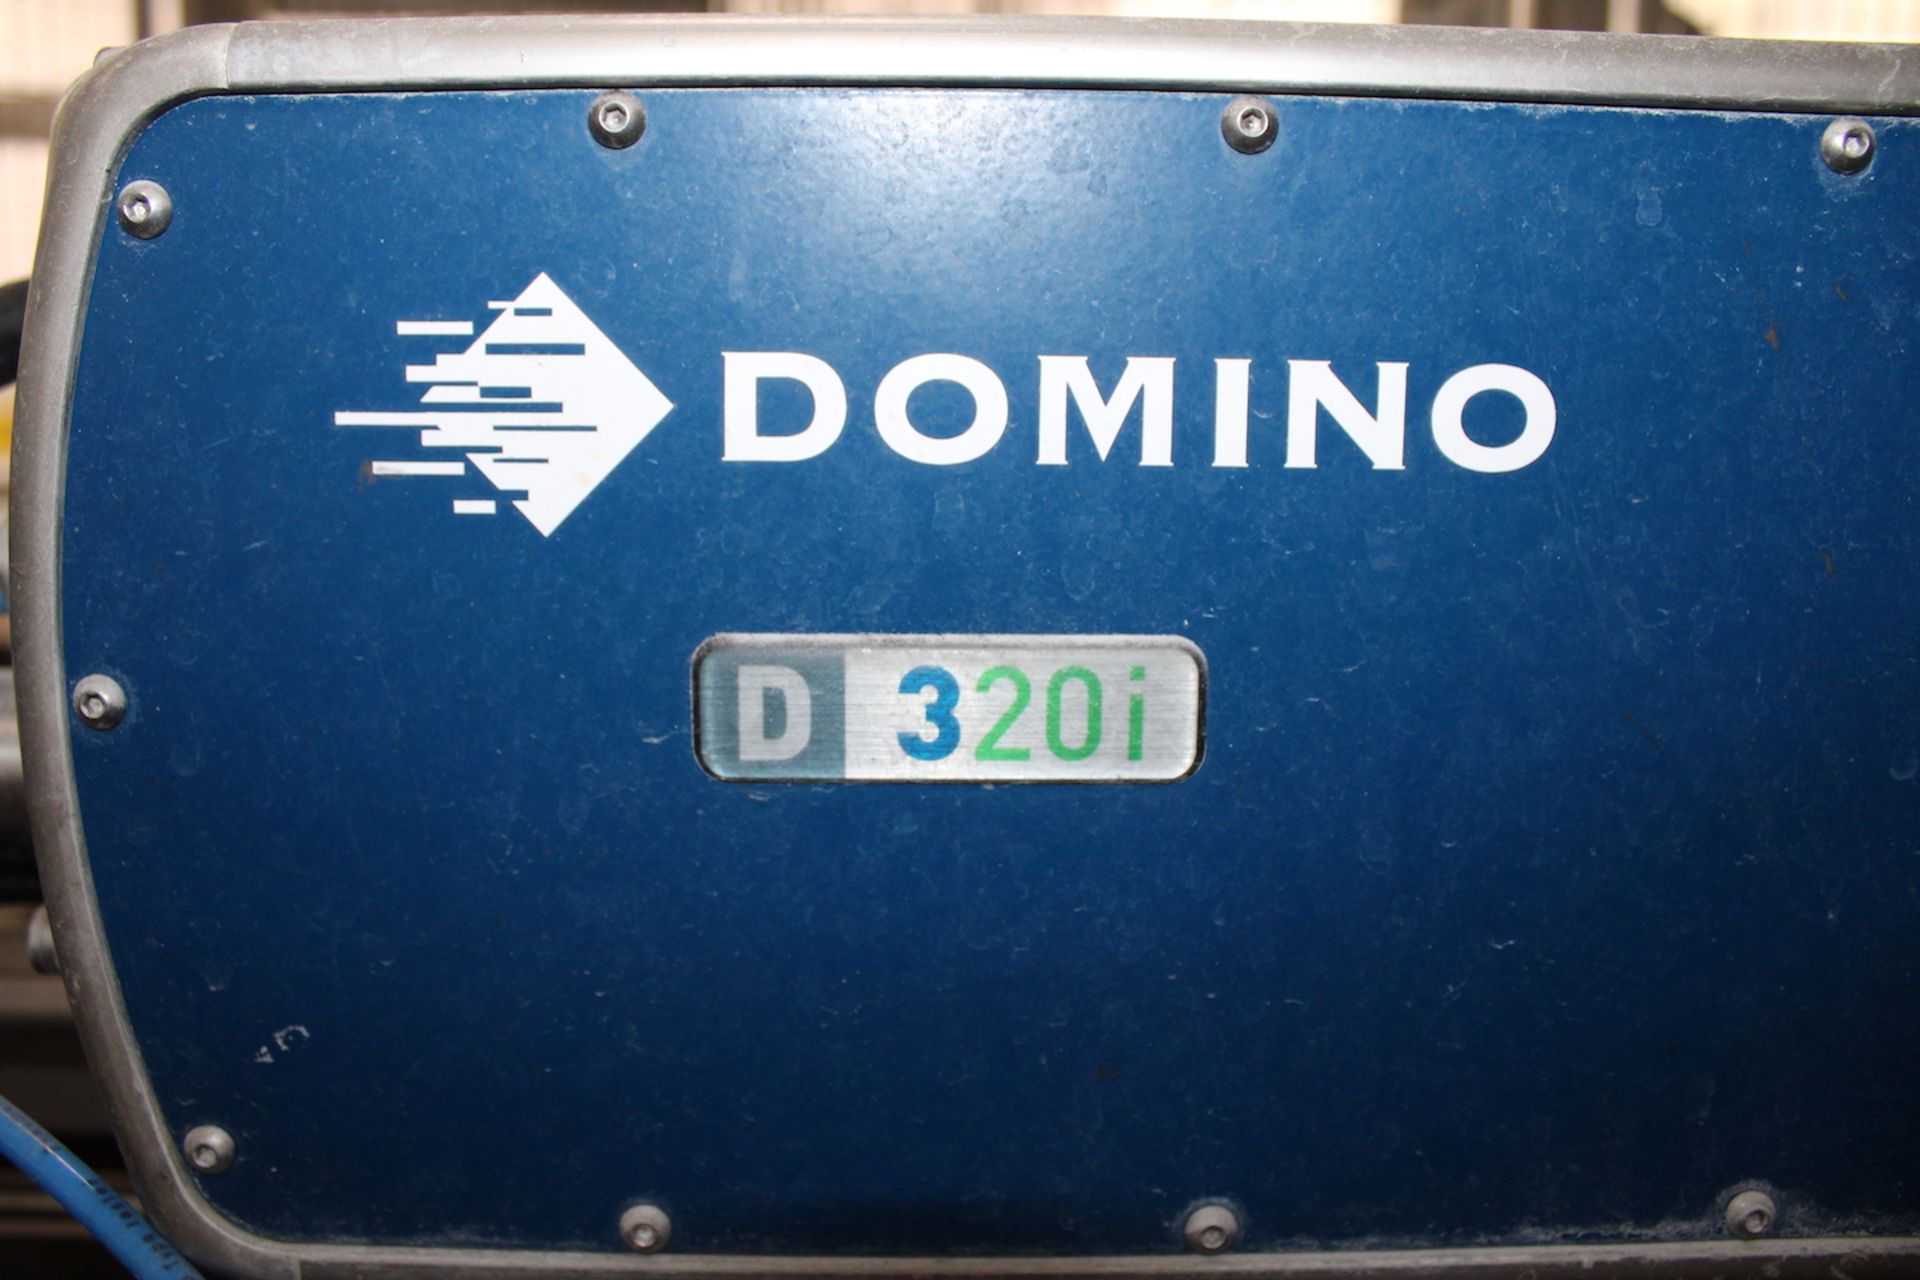 DOMINO DPX1000 DATE CODER, WITH D320I PRINT HEAD - Image 6 of 8